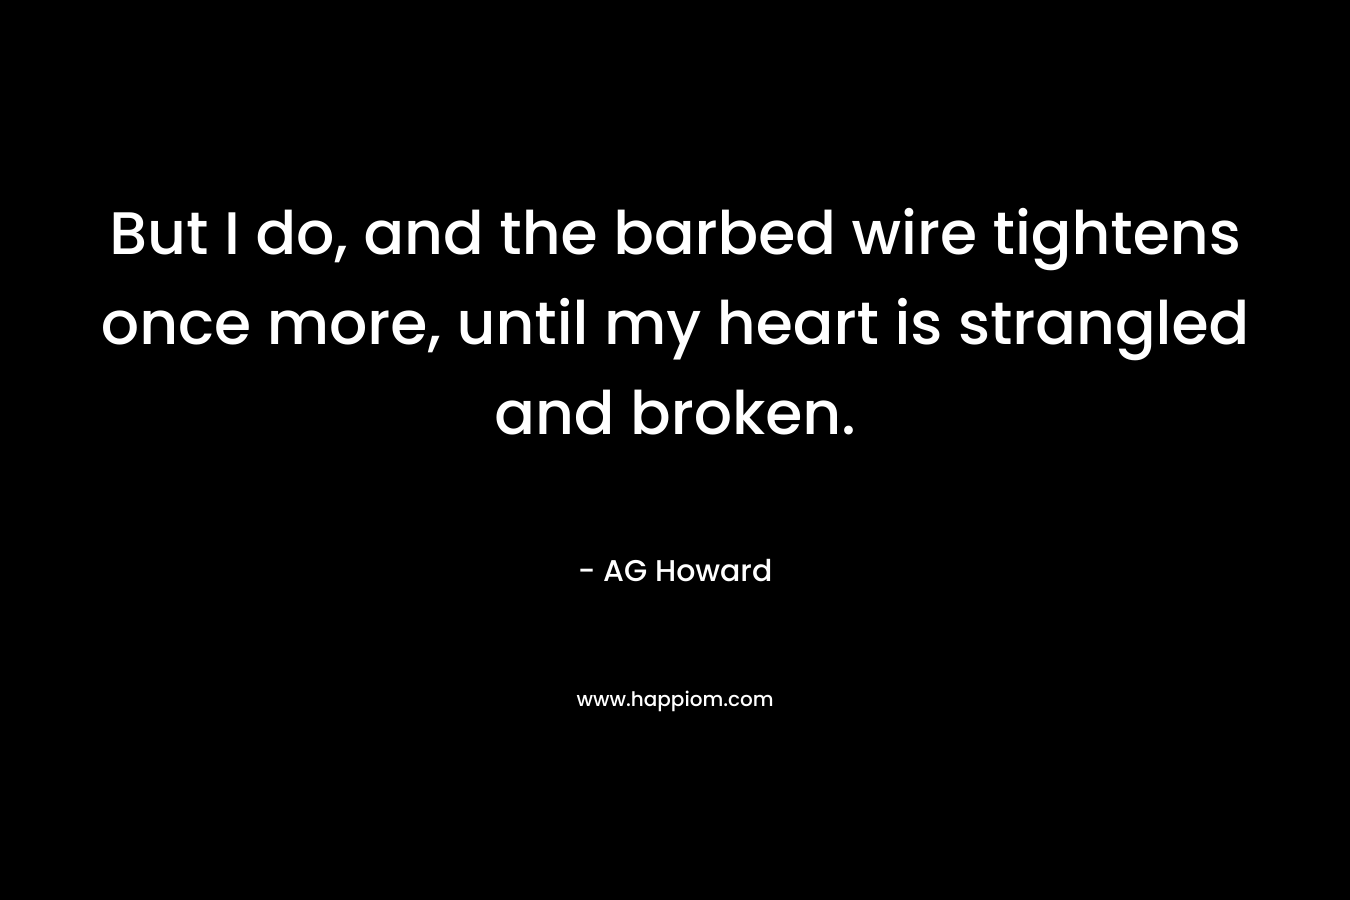 But I do, and the barbed wire tightens once more, until my heart is strangled and broken. – AG Howard